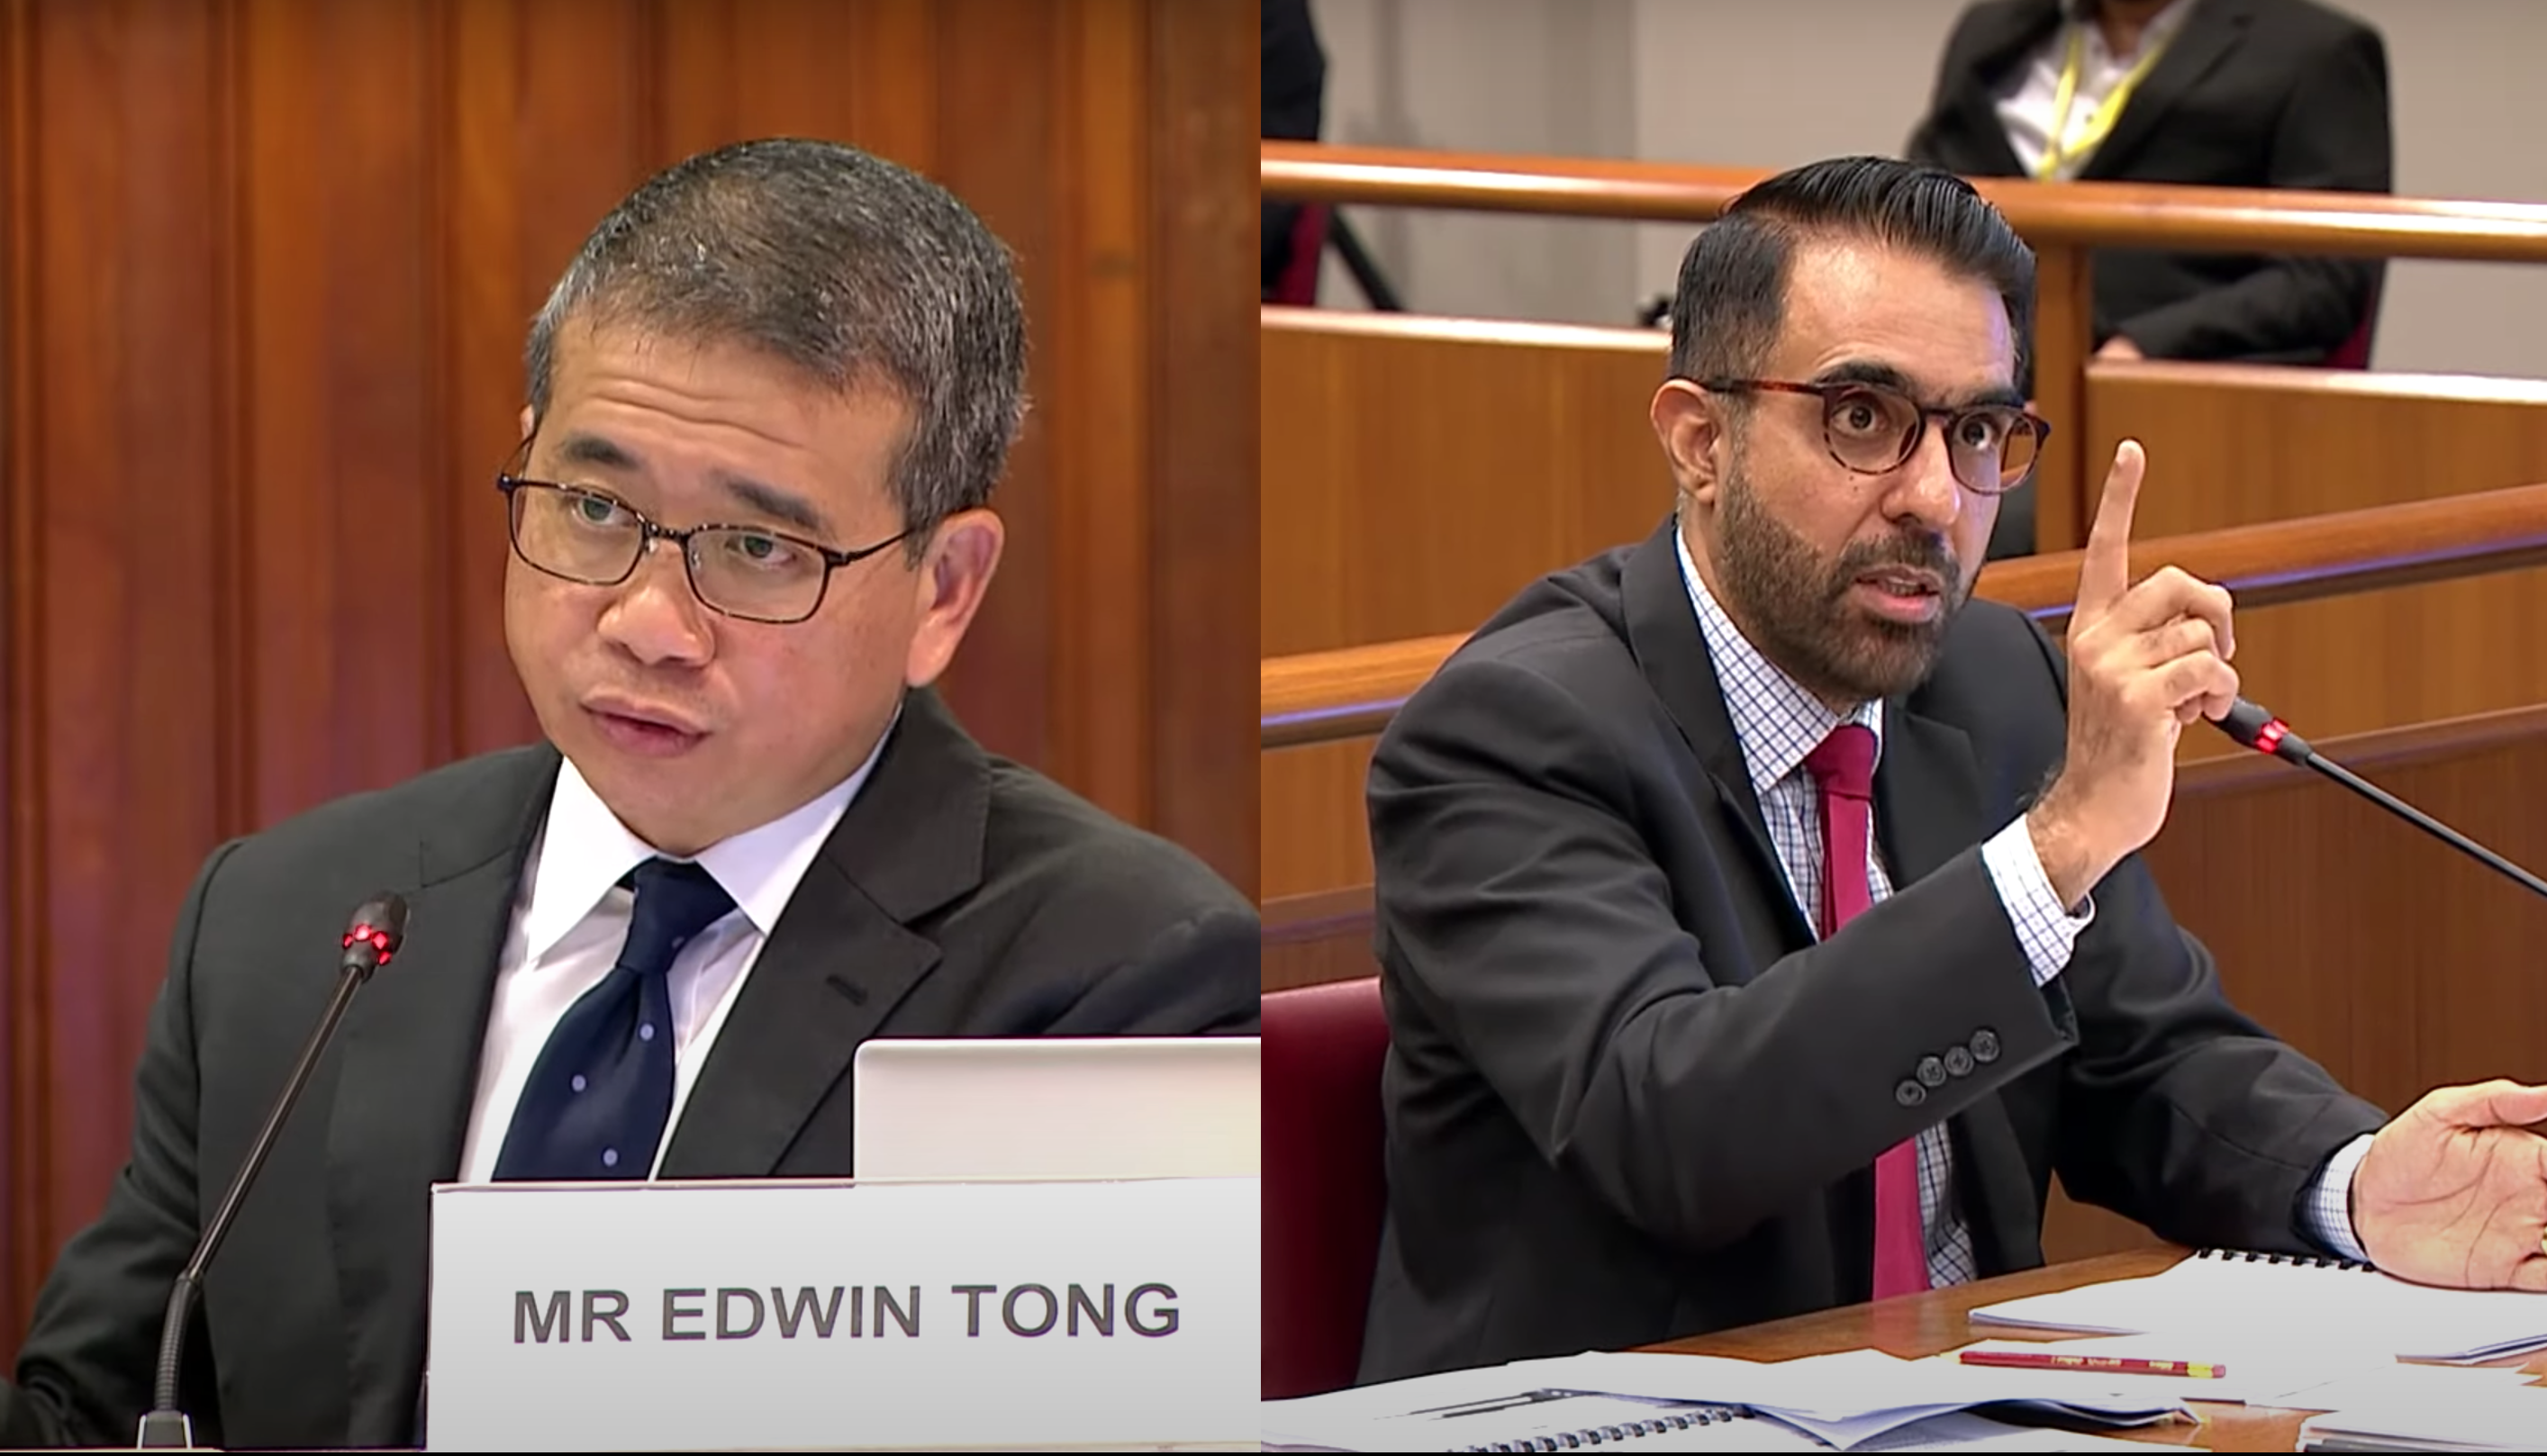 How Did Edwin Tong and Pritam Singh Perform at the COP Hearing?